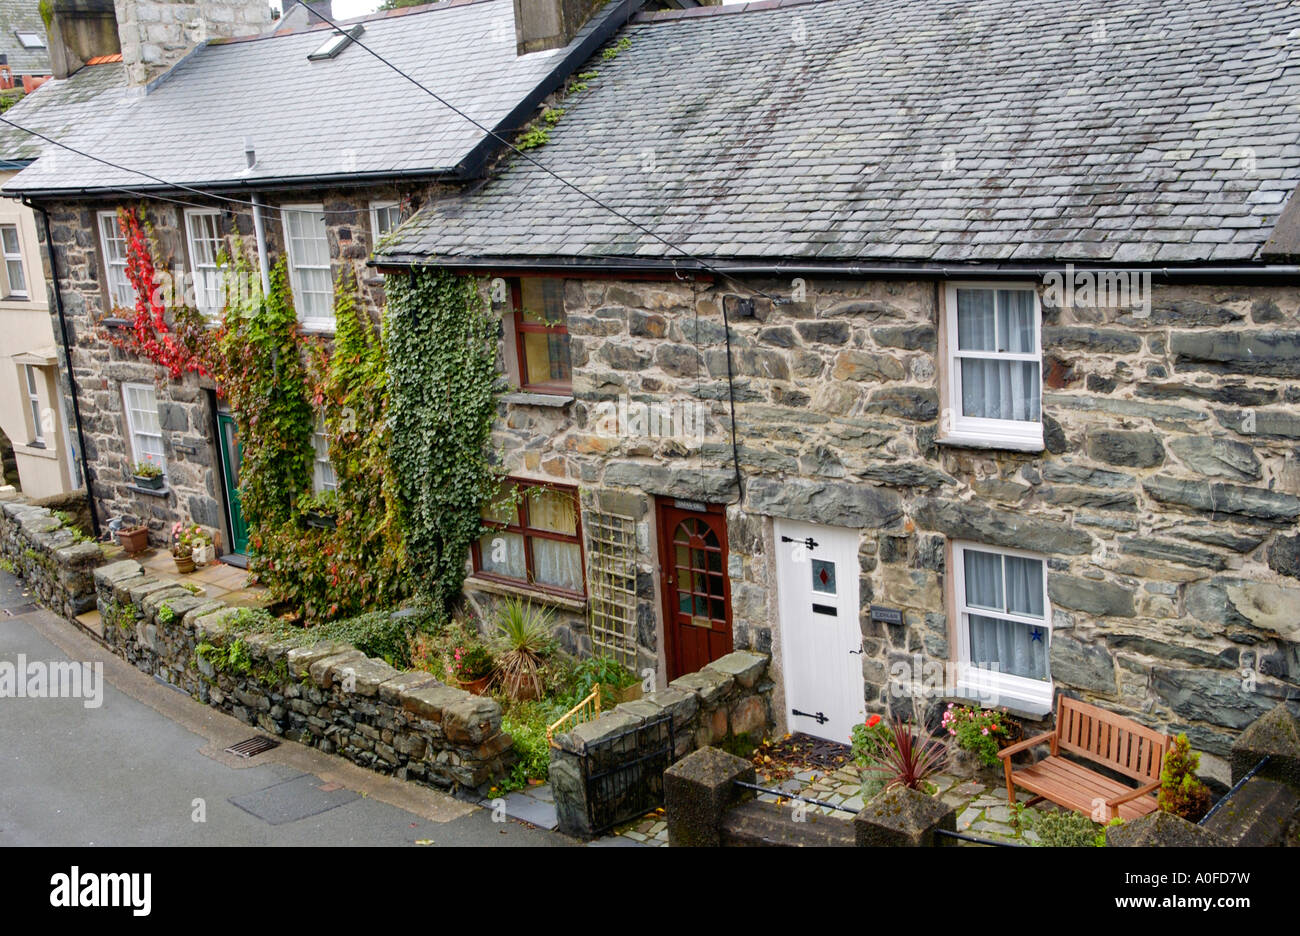 Terrace of traditional stone built terraced cottages typical of the region in Harlech Gwynedd North Wales UK Stock Photo